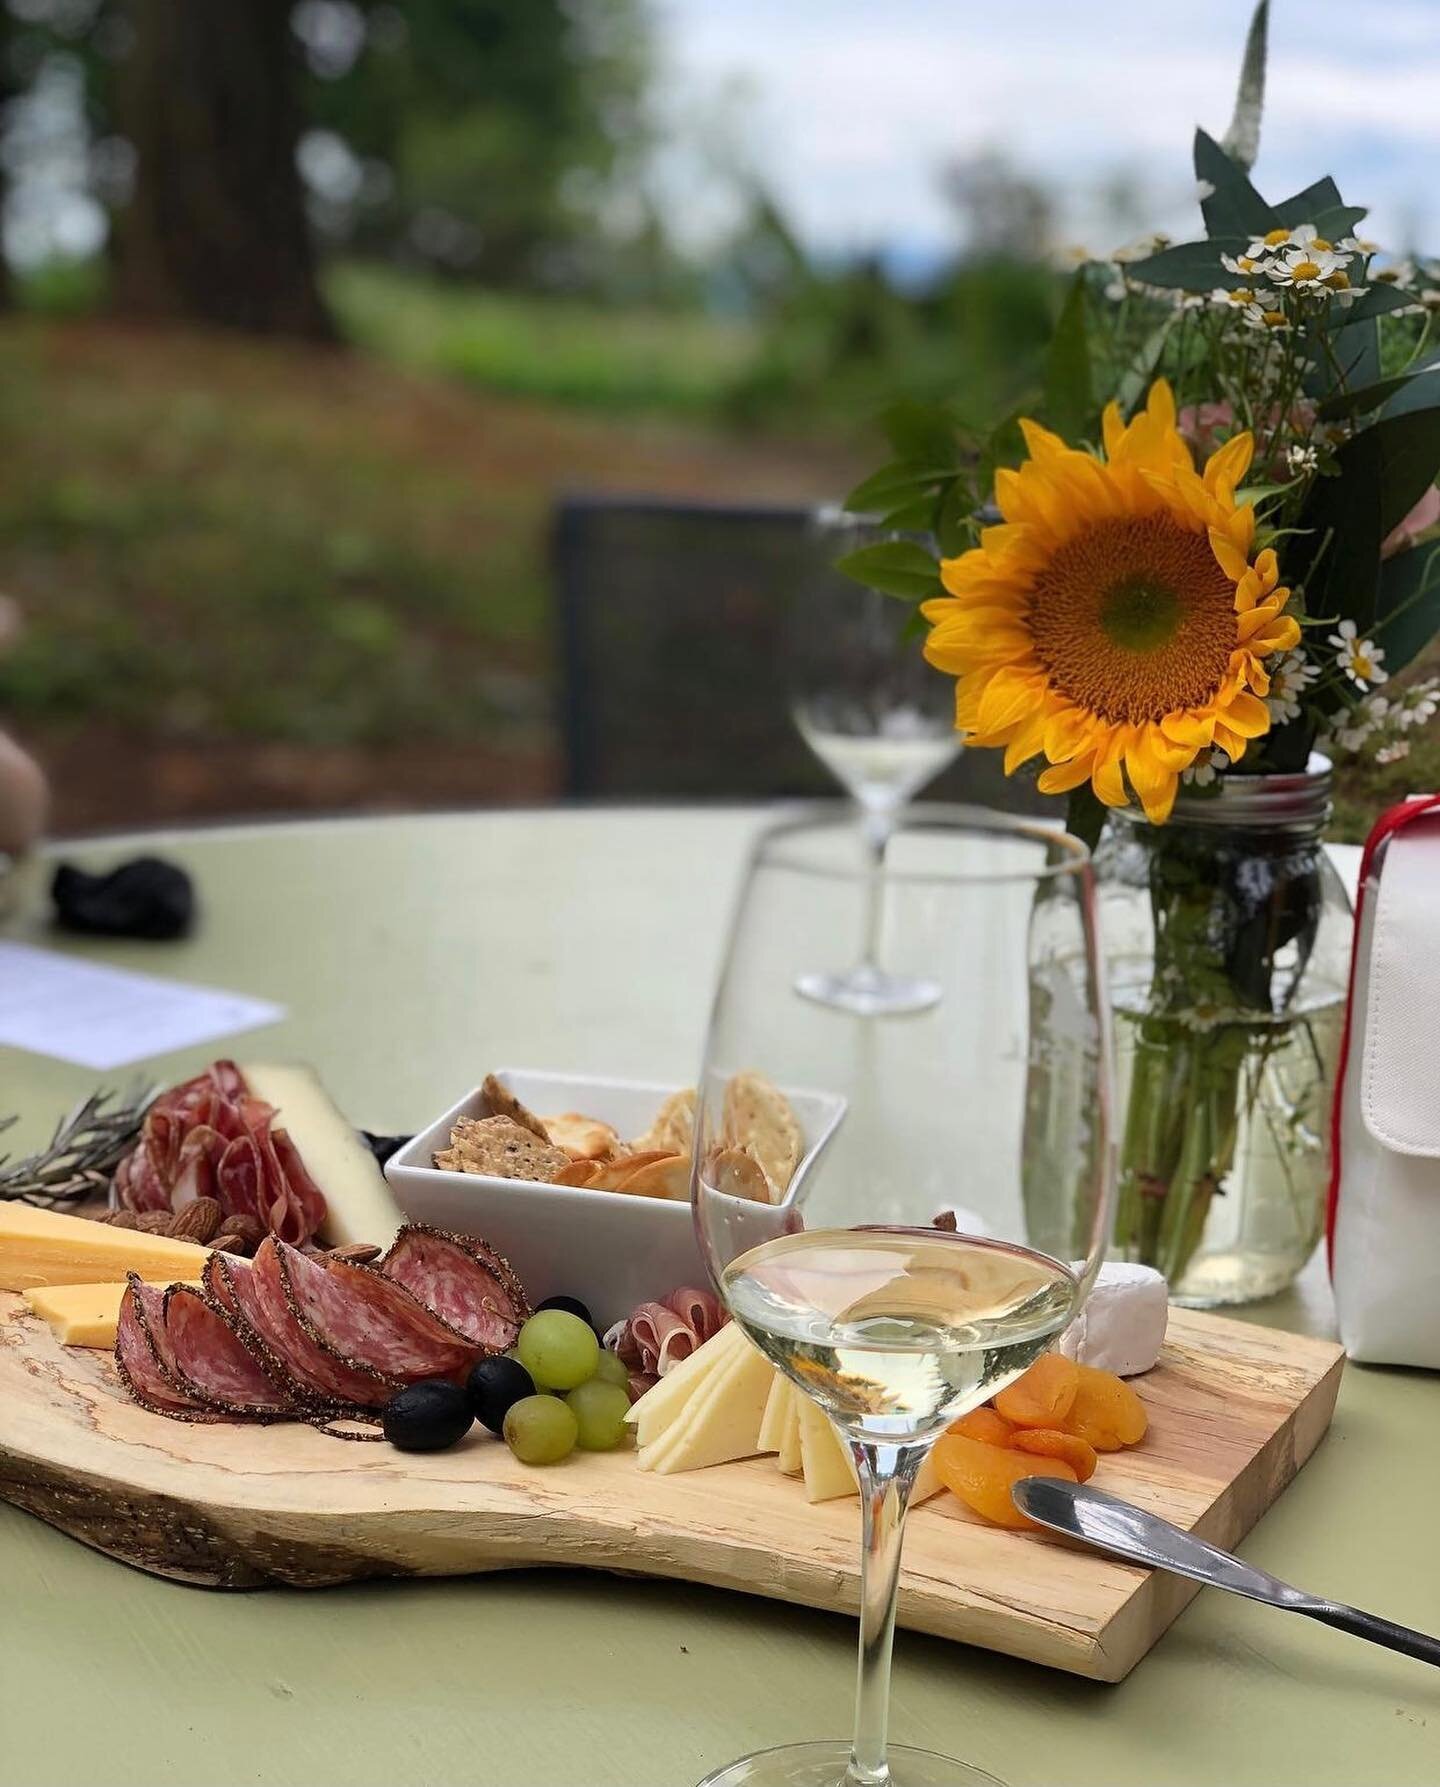 Cool off up here under the firs and cedars 750 feet up in the hills of West Linn this weekend! We have indoor and outdoor tasting available. Thanks to @simplyrion for taking this gorgeous photo on your visit.